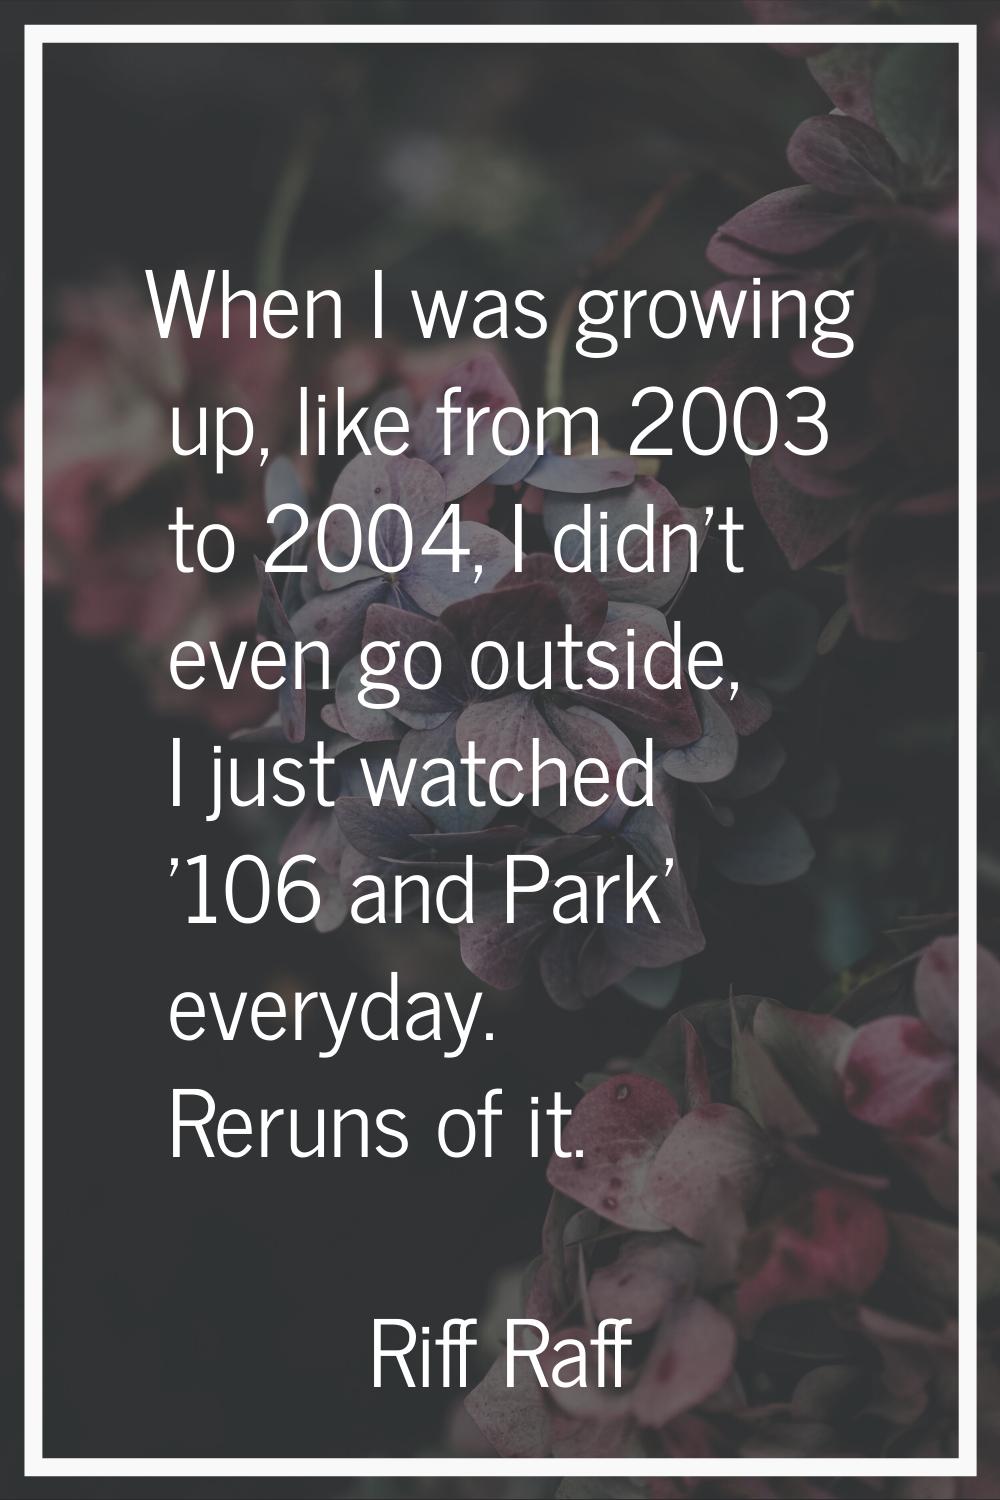 When I was growing up, like from 2003 to 2004, I didn't even go outside, I just watched '106 and Pa